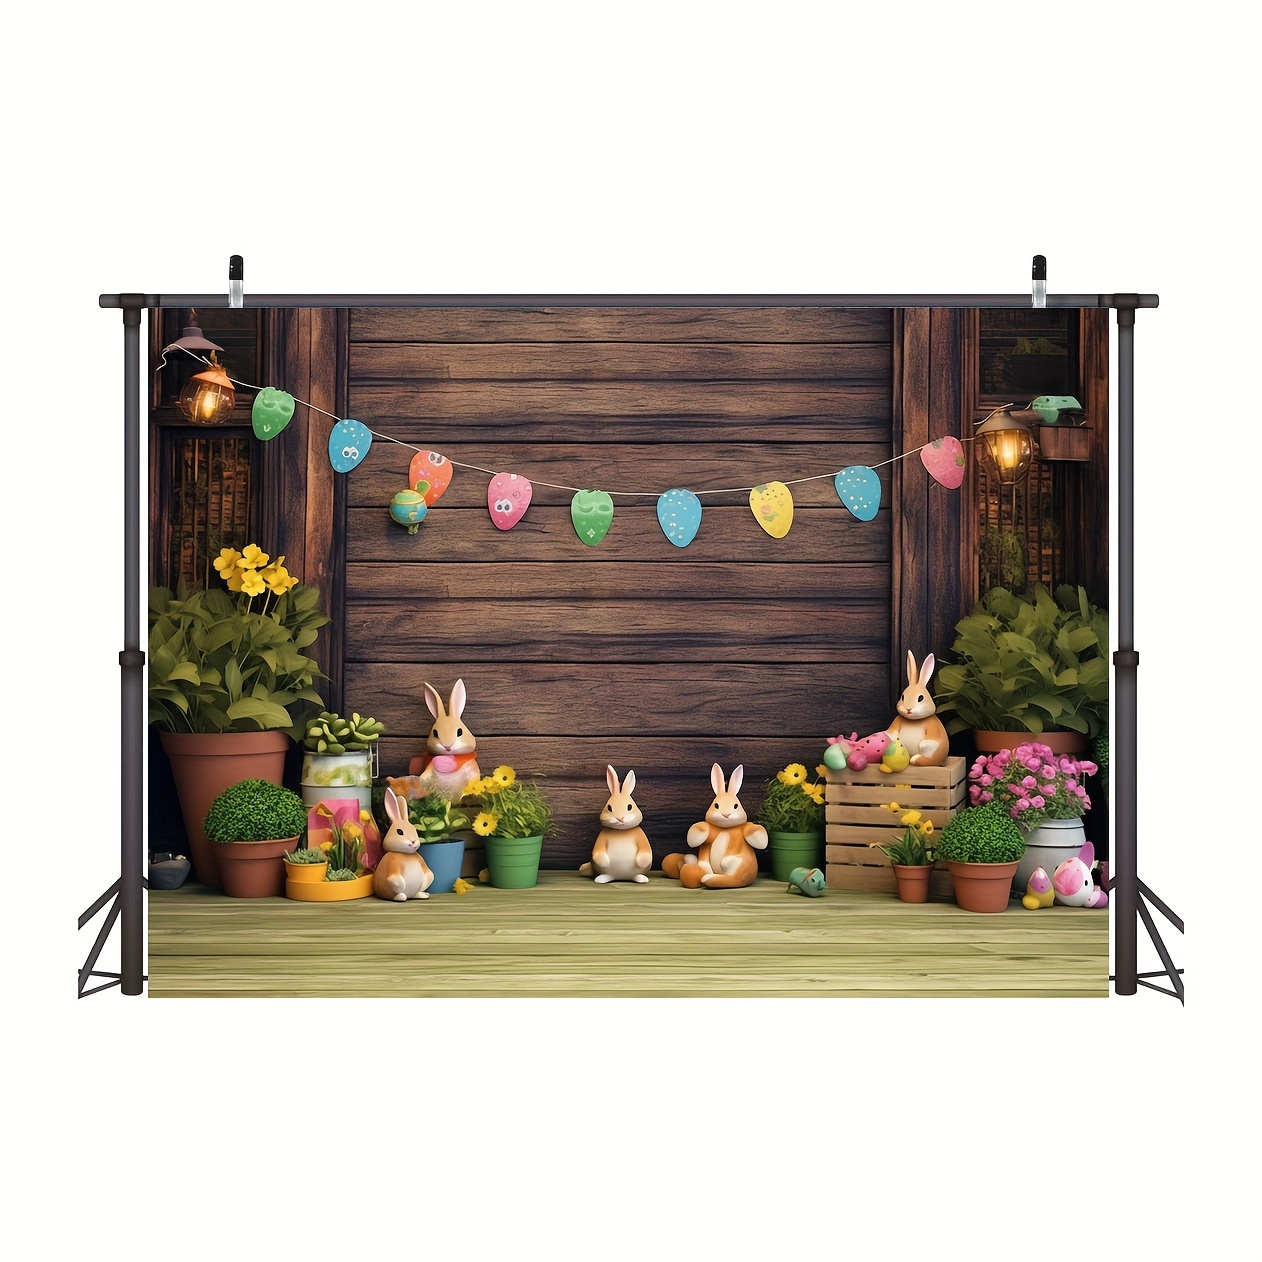 1pc spring happy easter theme photography backdrop rustic wooden wall background bunny rabbit colorful eggs grass floral baby kids portrait party decor banner photo booth studio